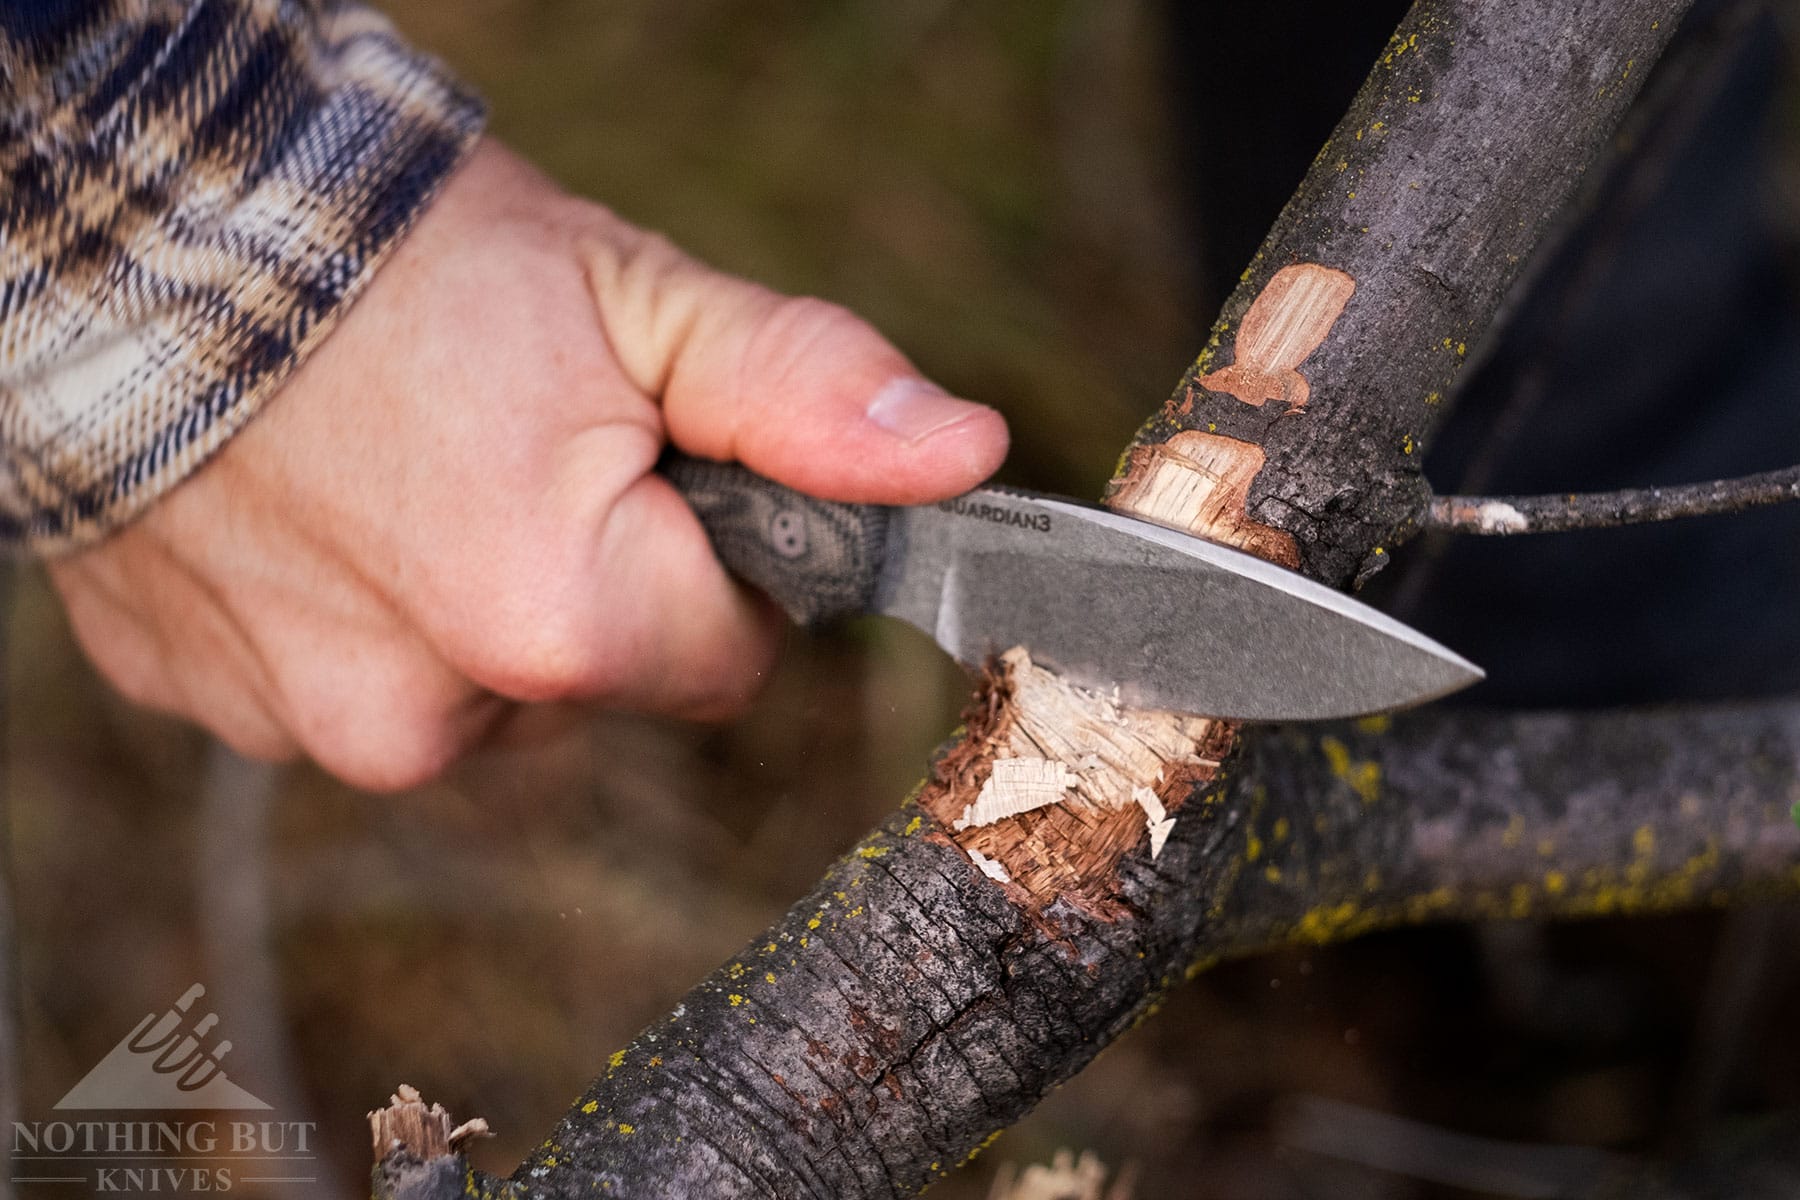 Chopping a branch with the Bradford Guardian 3 fixed blade survival knife.